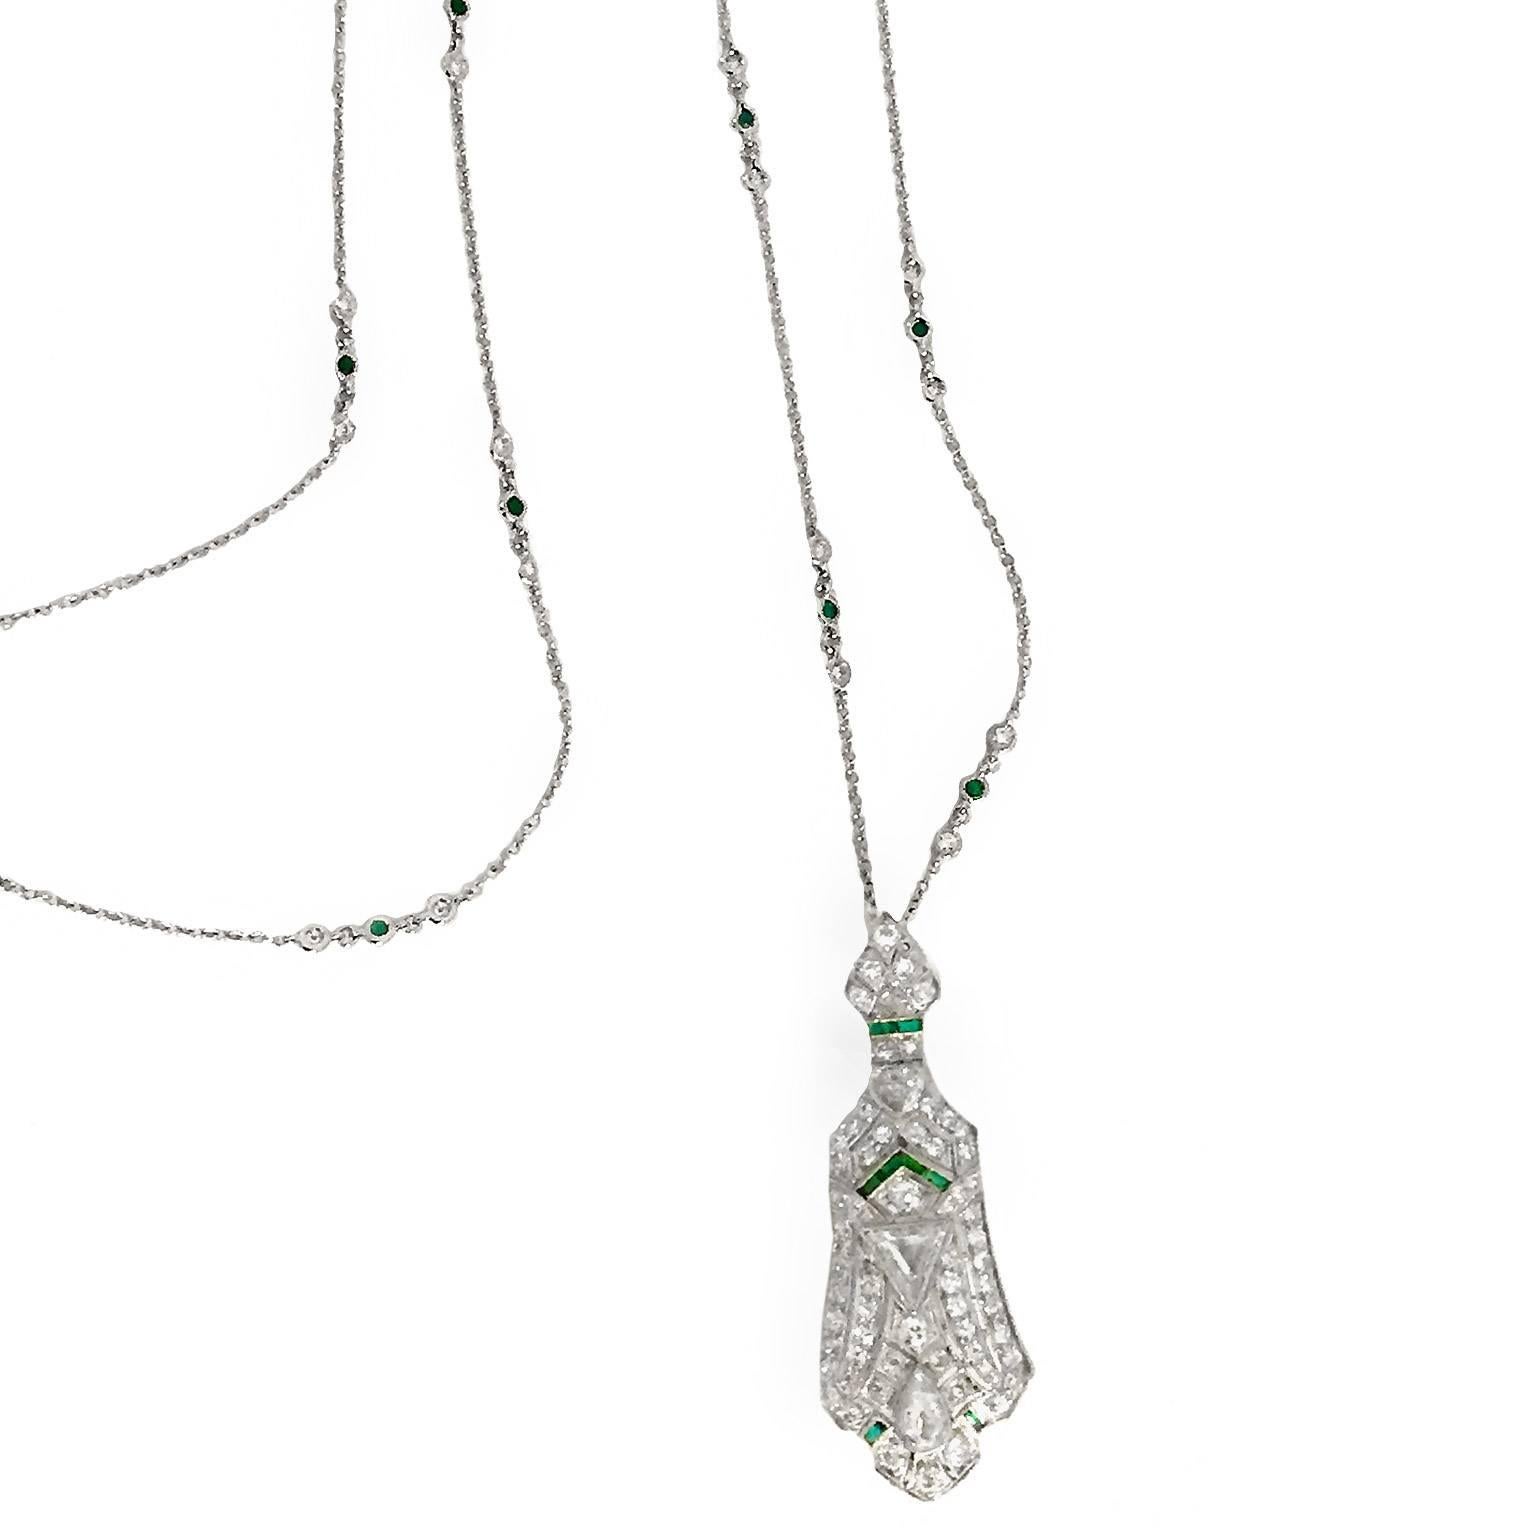 Diamonds and emeralds all around ... a stunning piece! Original art deco platinum pendant with approx 3-1/2 carats of diamonds includes a custom diamond and emerald chain in 18k gold designed by Mindi Mond.  Pendant has a larger trillion and pear-